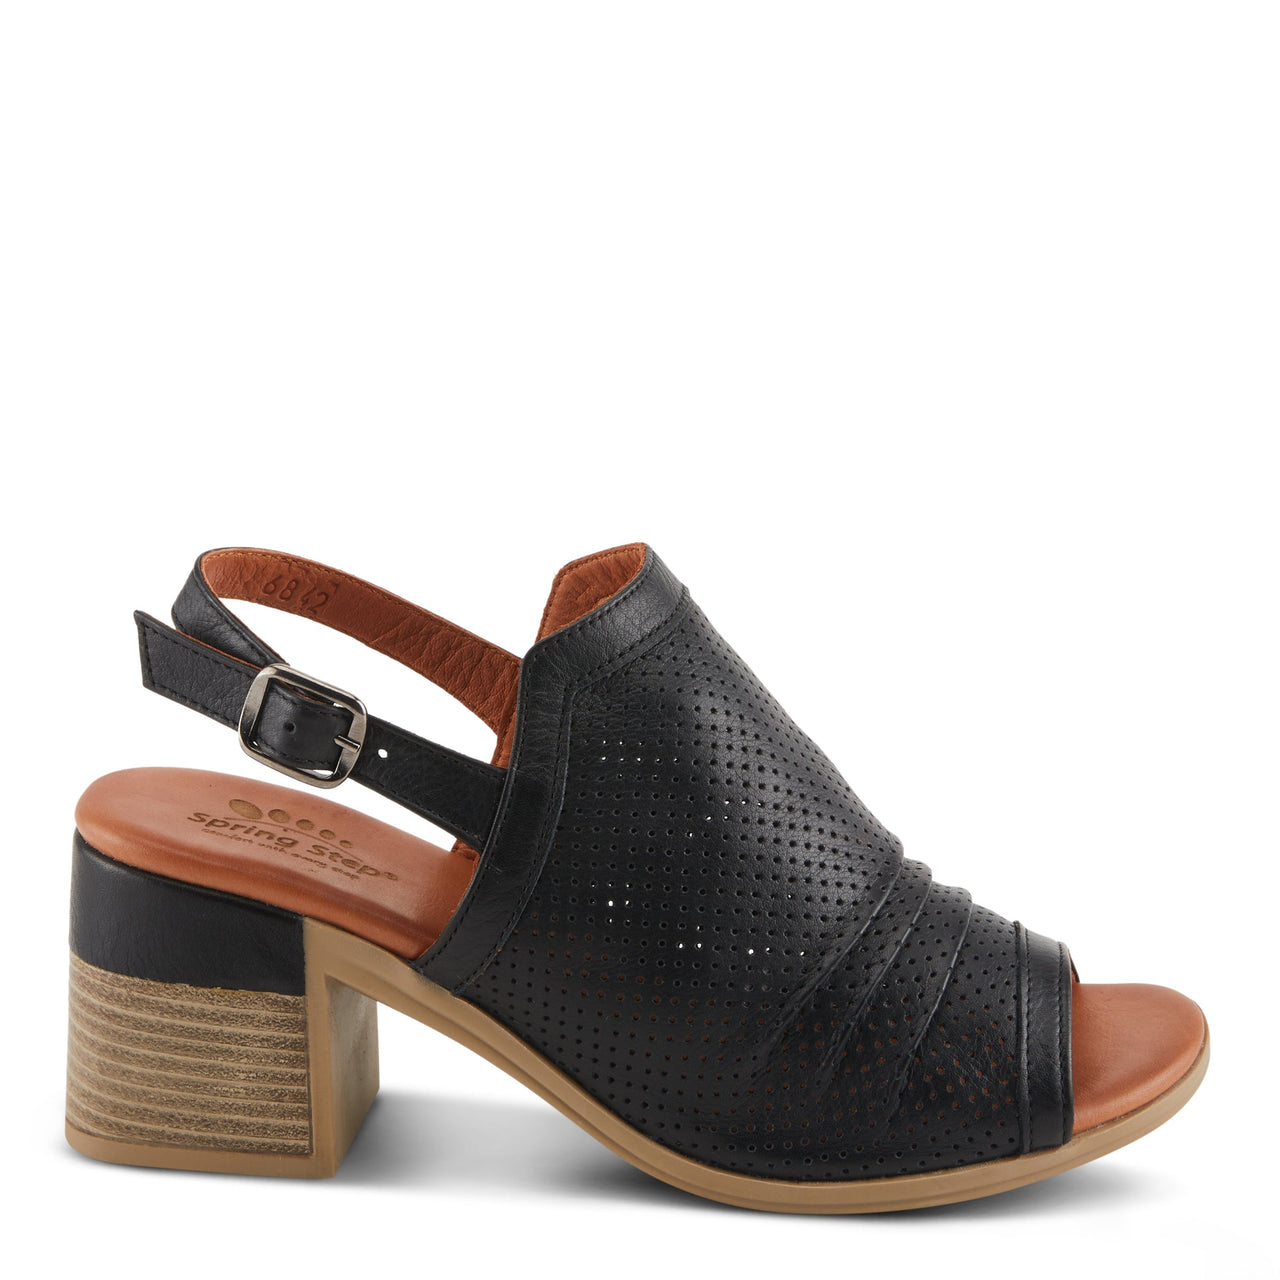 Women's Spring Step Noctium Sandals in black leather with comfortable cushioned footbed